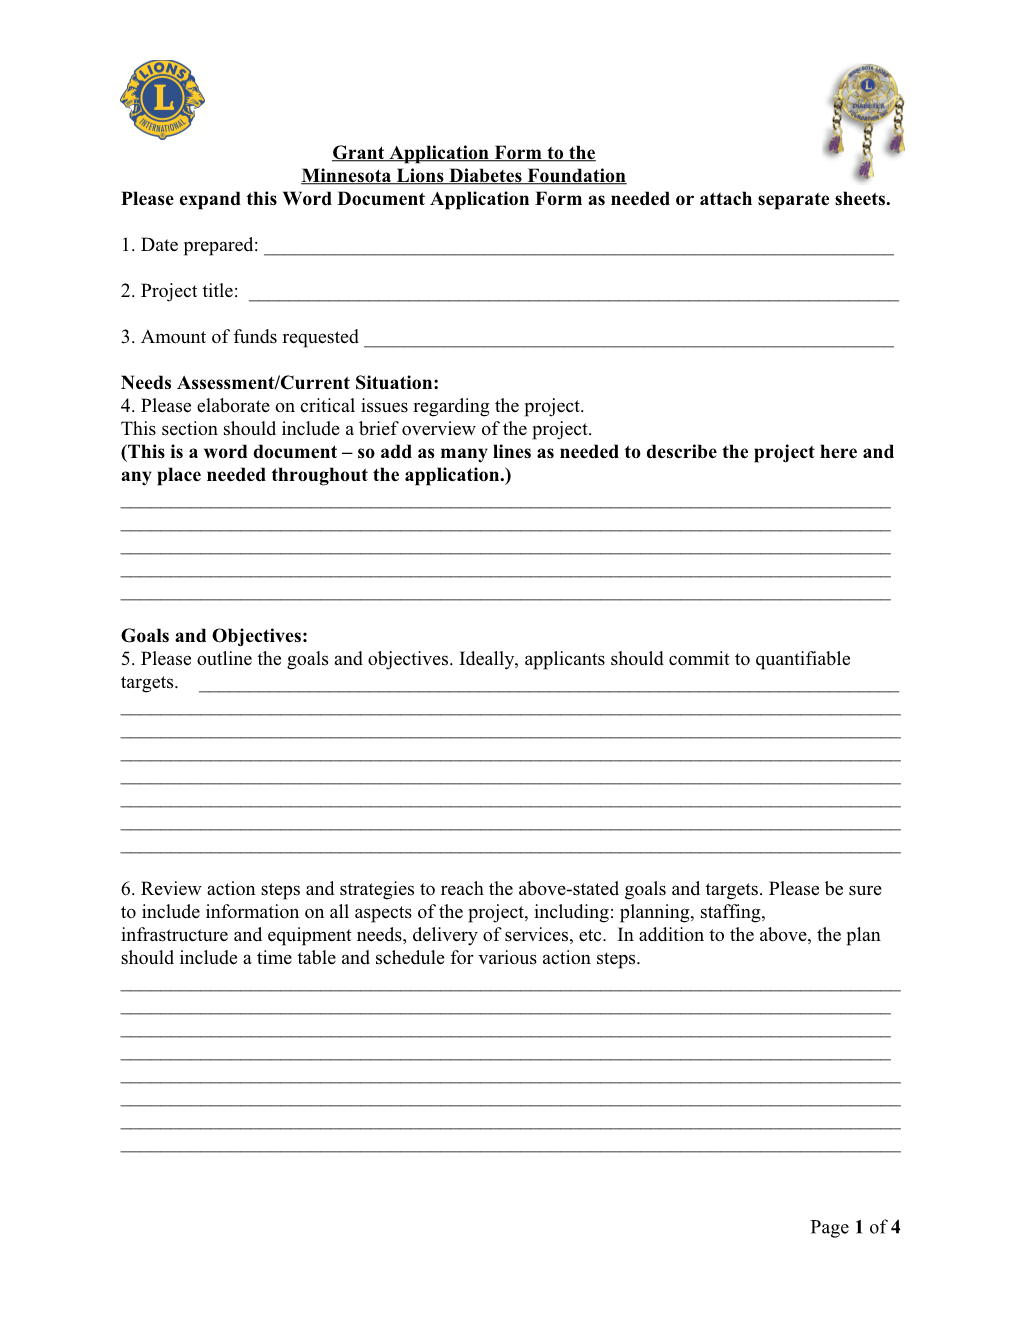 Grant Application Form to The